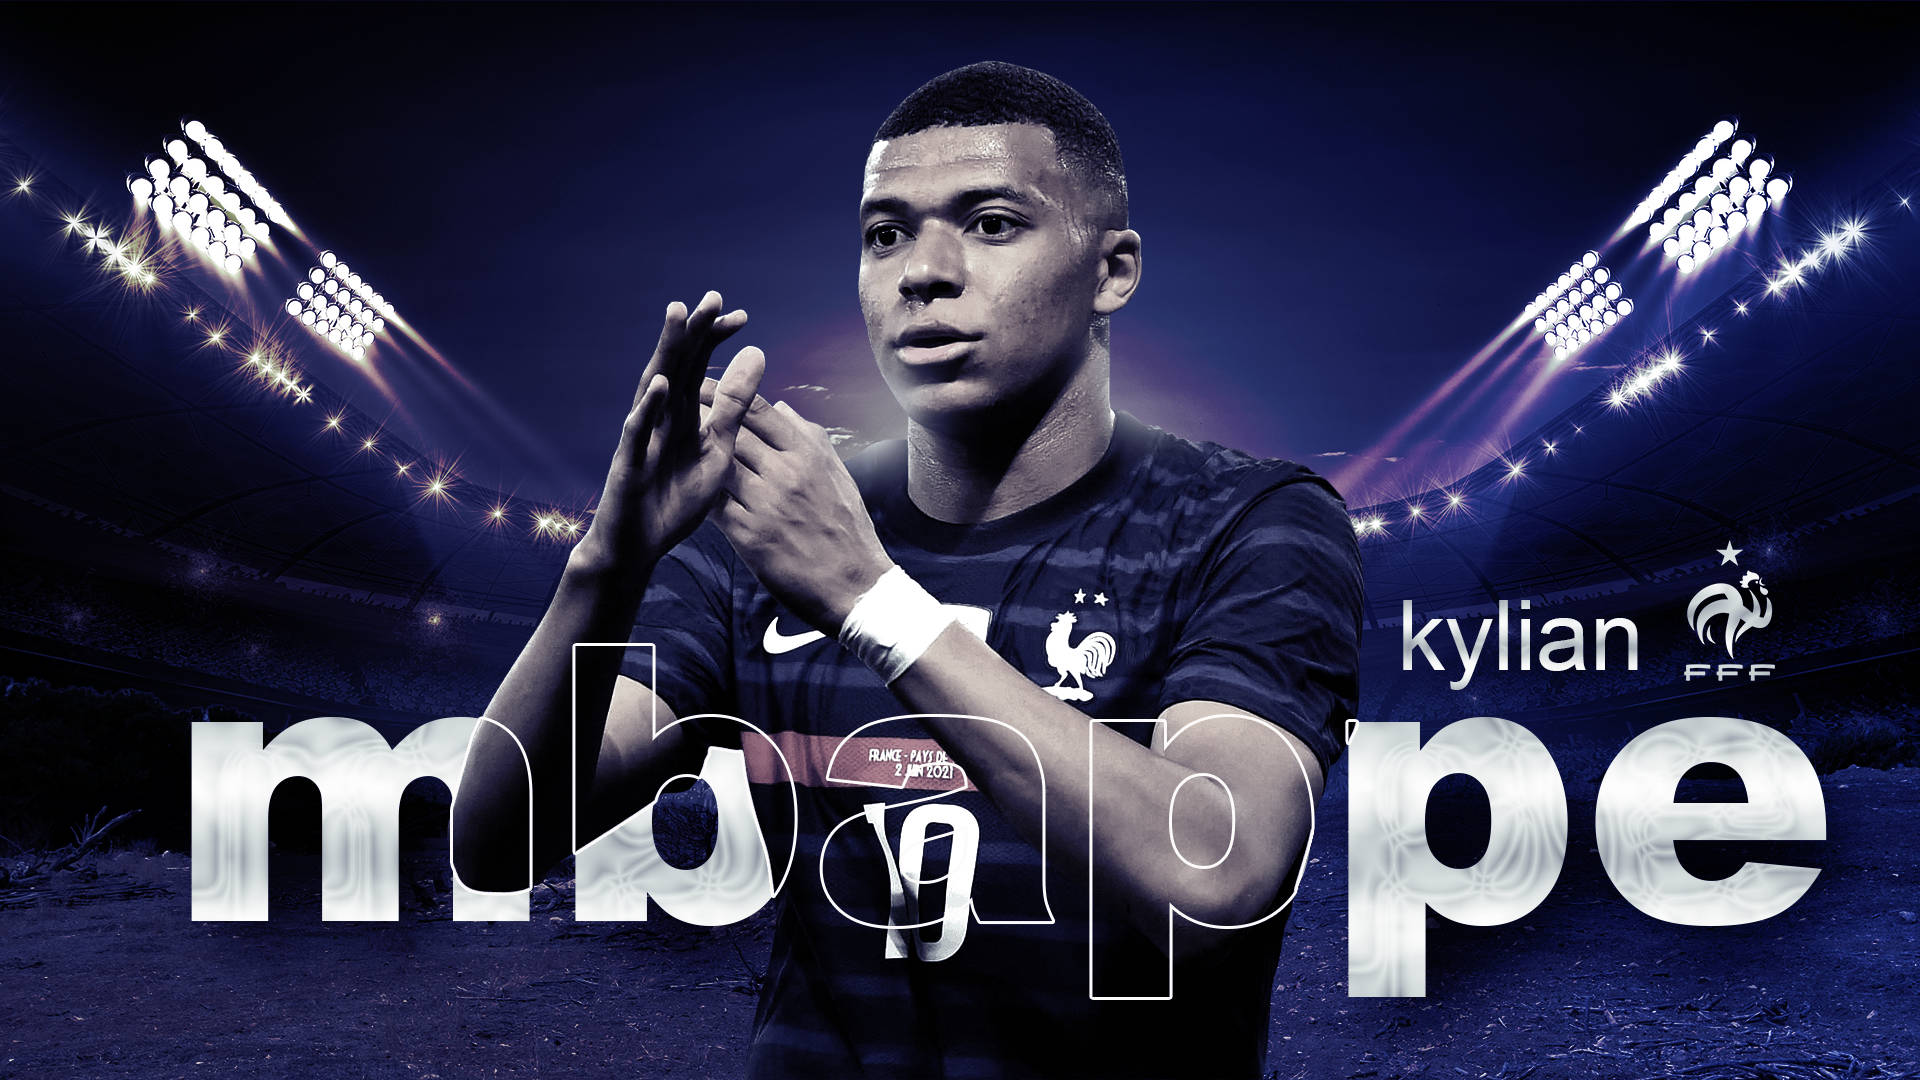 Mbappe Background s